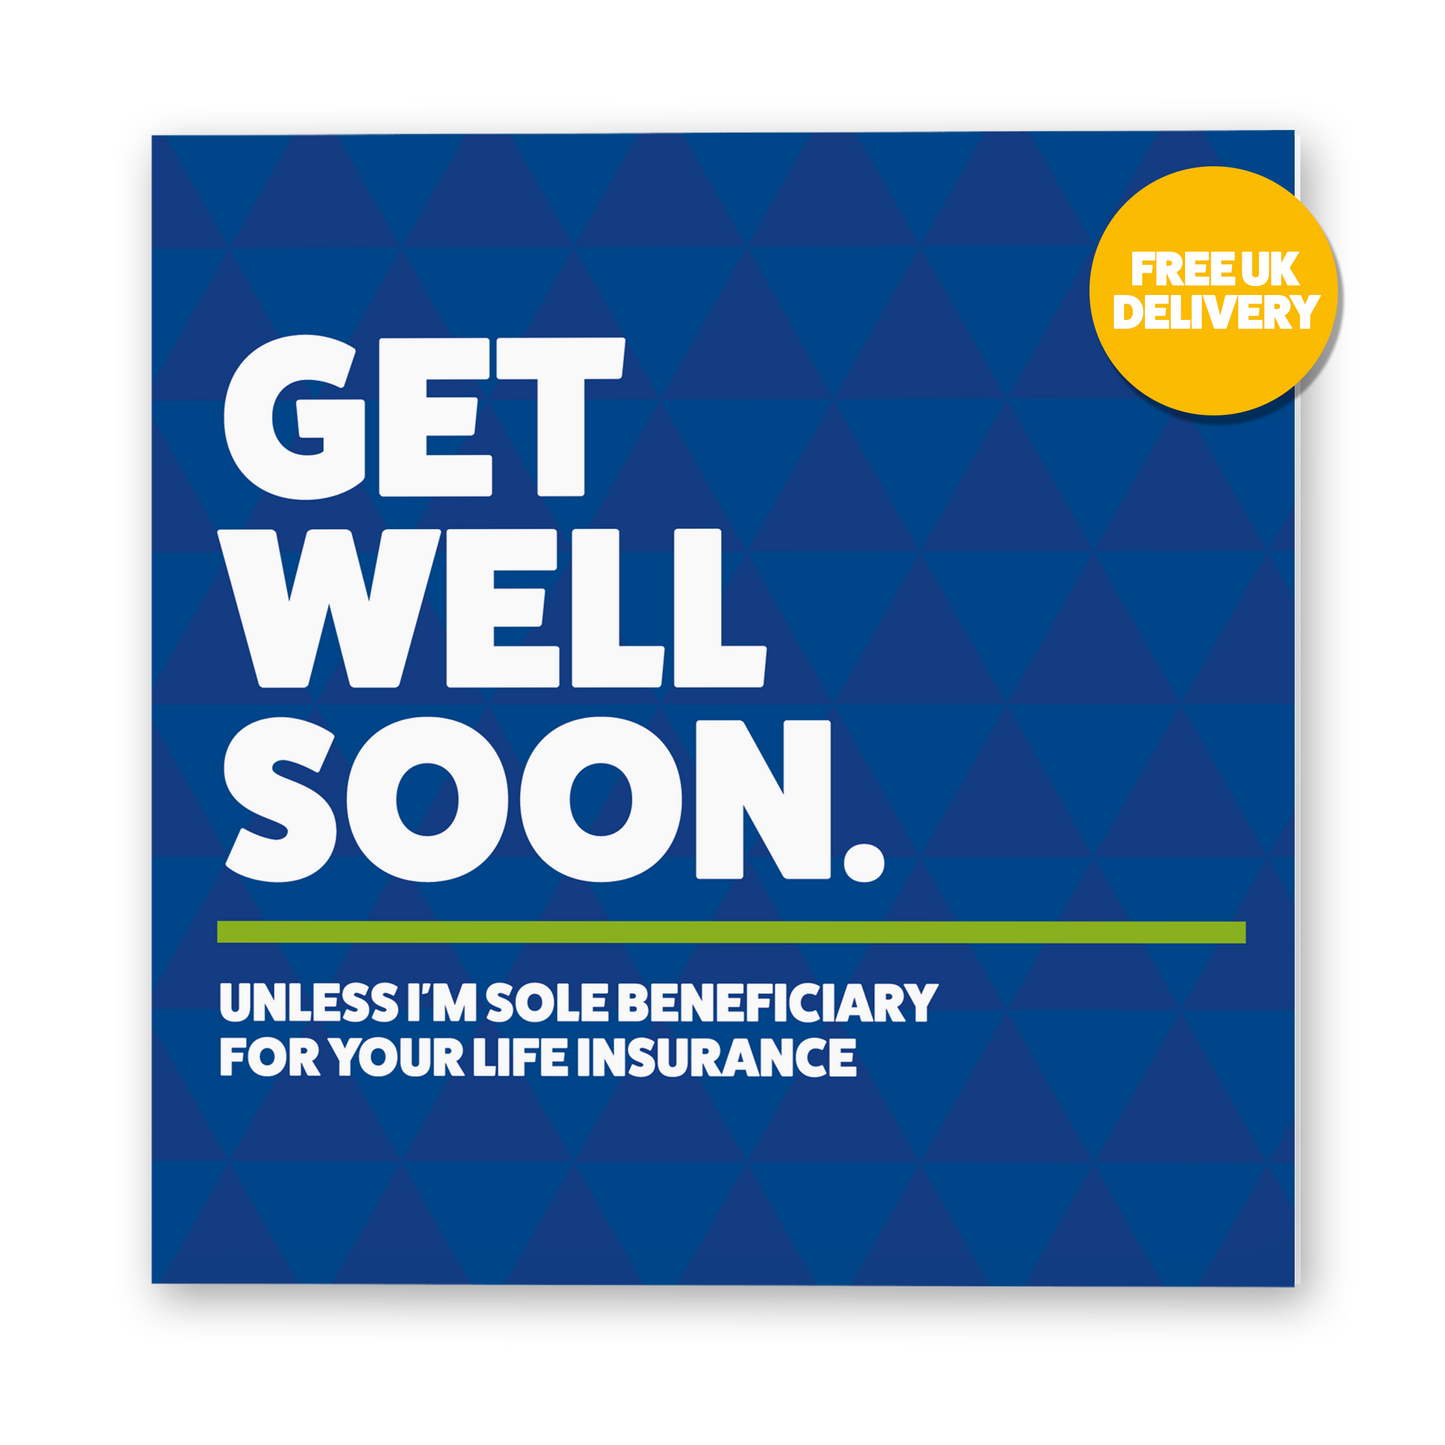 SALE Get Well Soon - Beneficiary Get Well Card